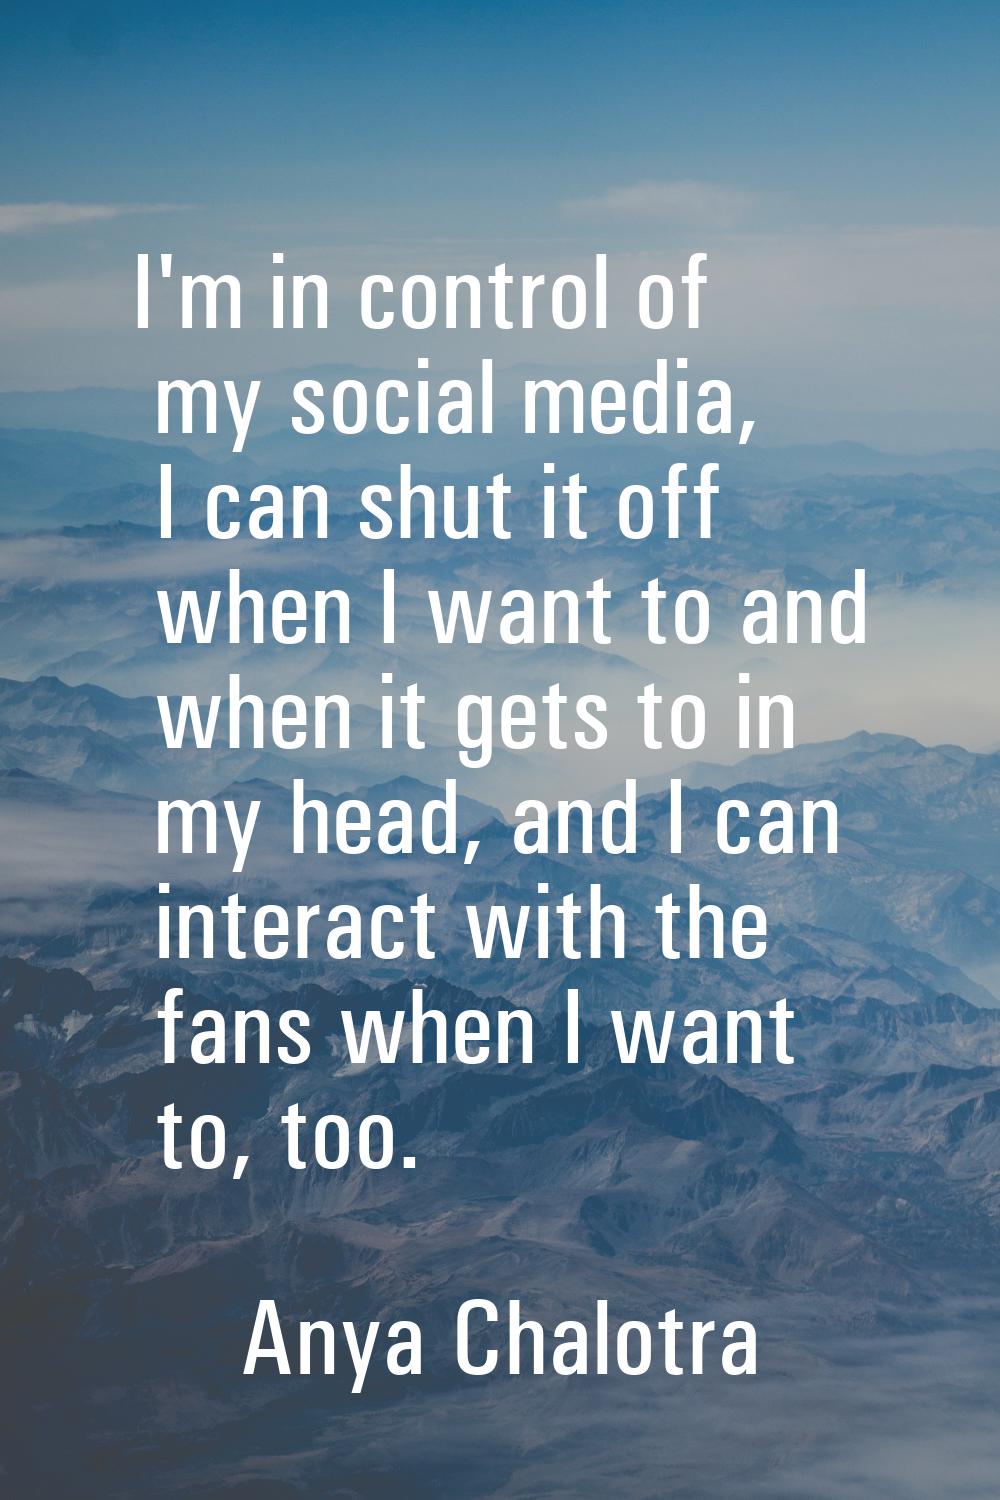 I'm in control of my social media, I can shut it off when I want to and when it gets to in my head,